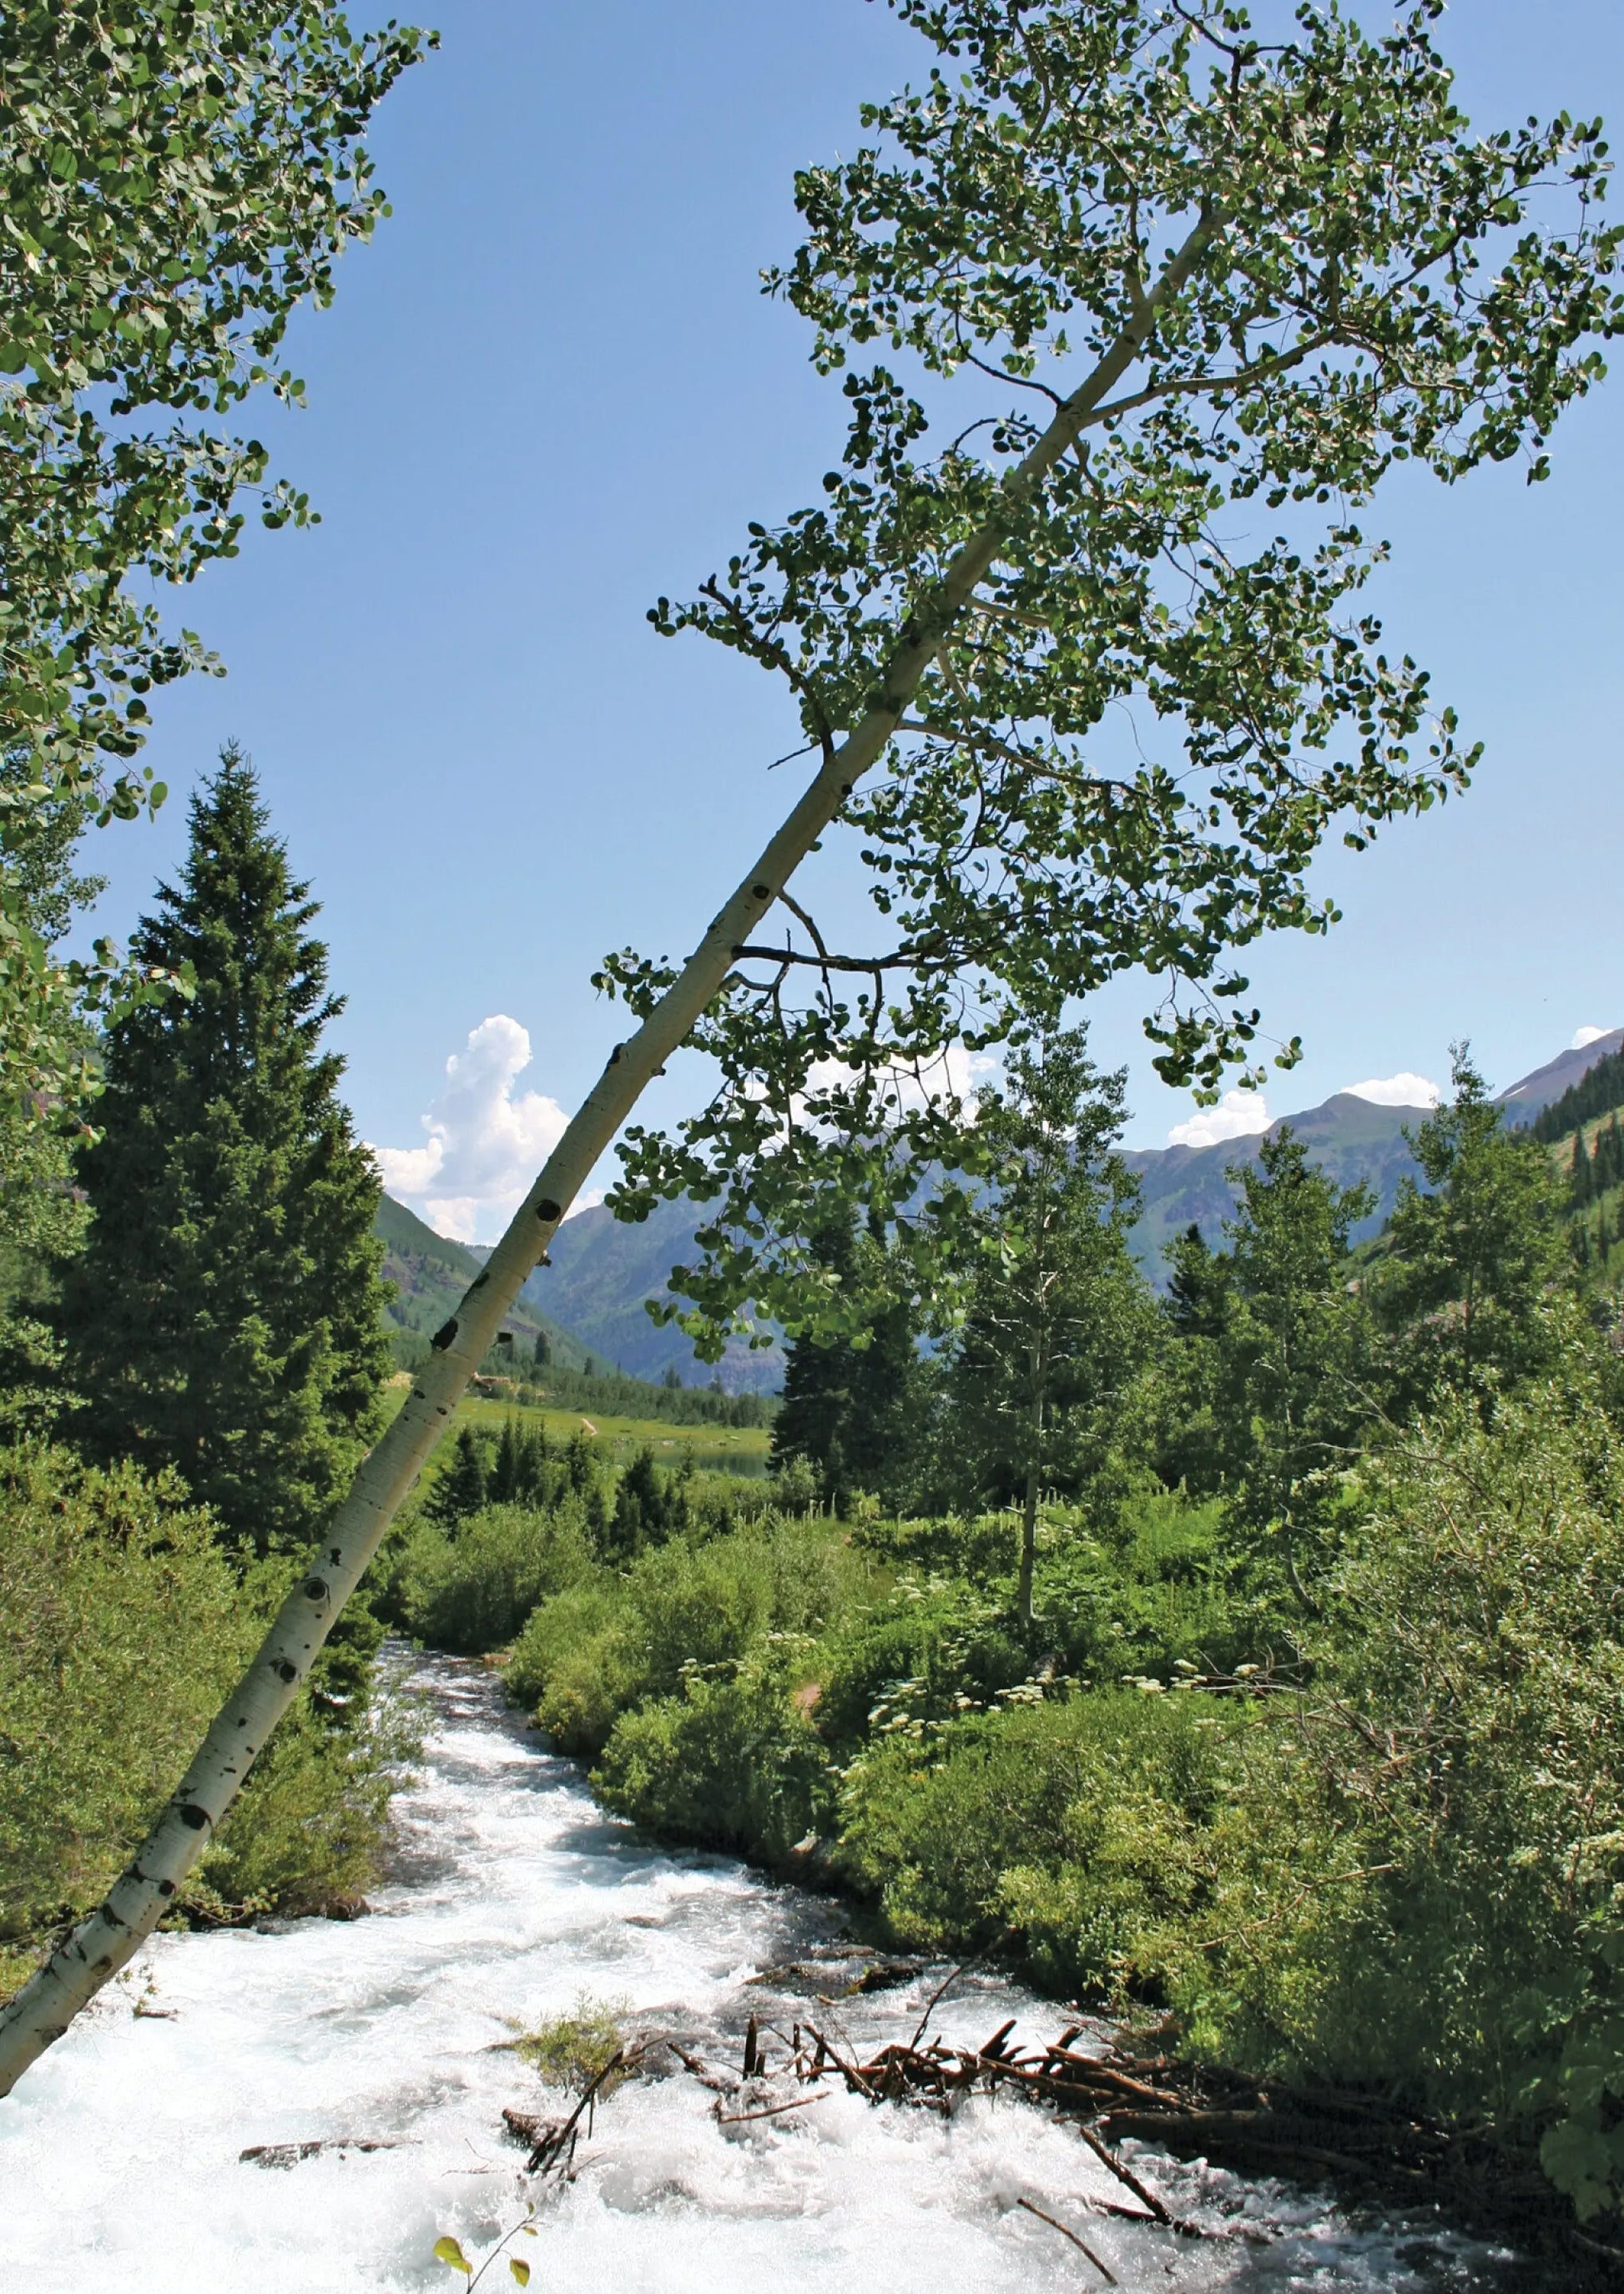 A photo of a vibrant spring scene in Aspen, Colorado where a crystal-clear brook rushes through a lush green meadow. In the foreground, a single aspen tree leans over the bank.